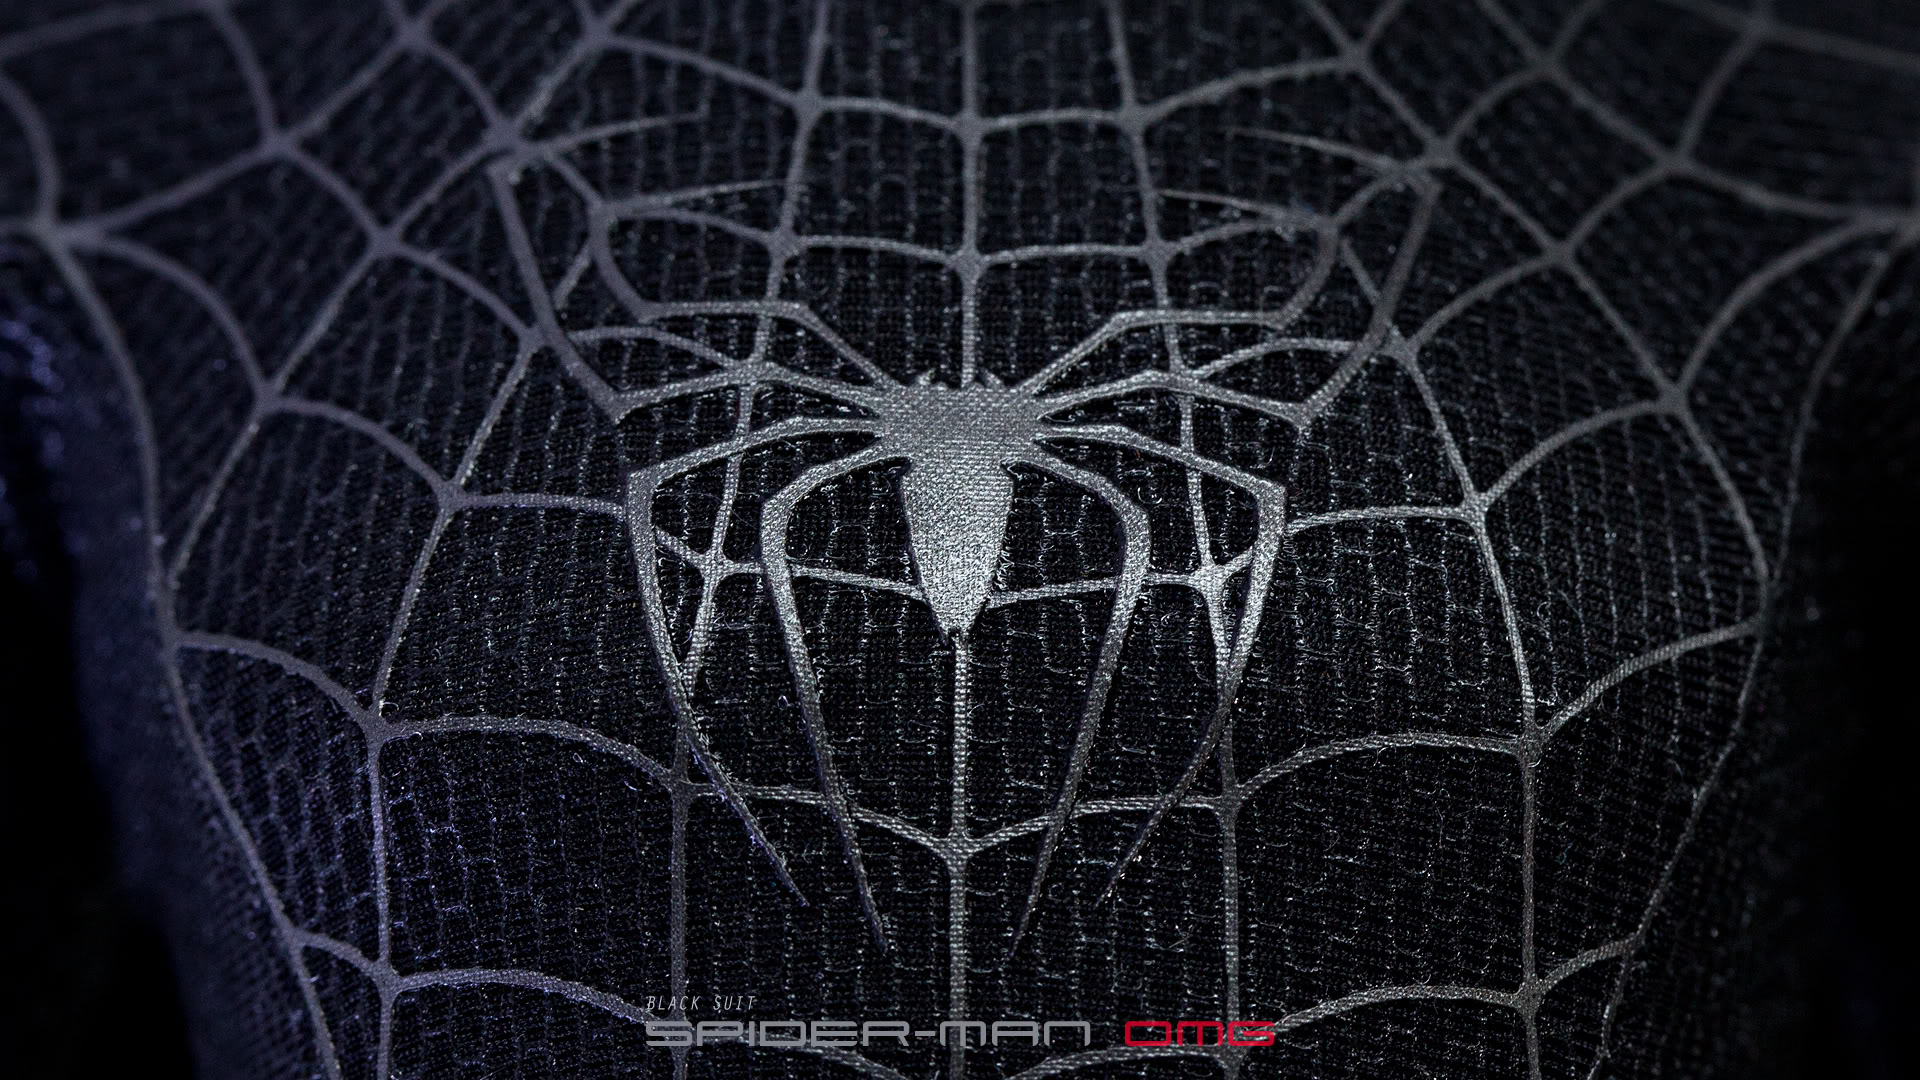 Black Spiderman Wallpaper For Android